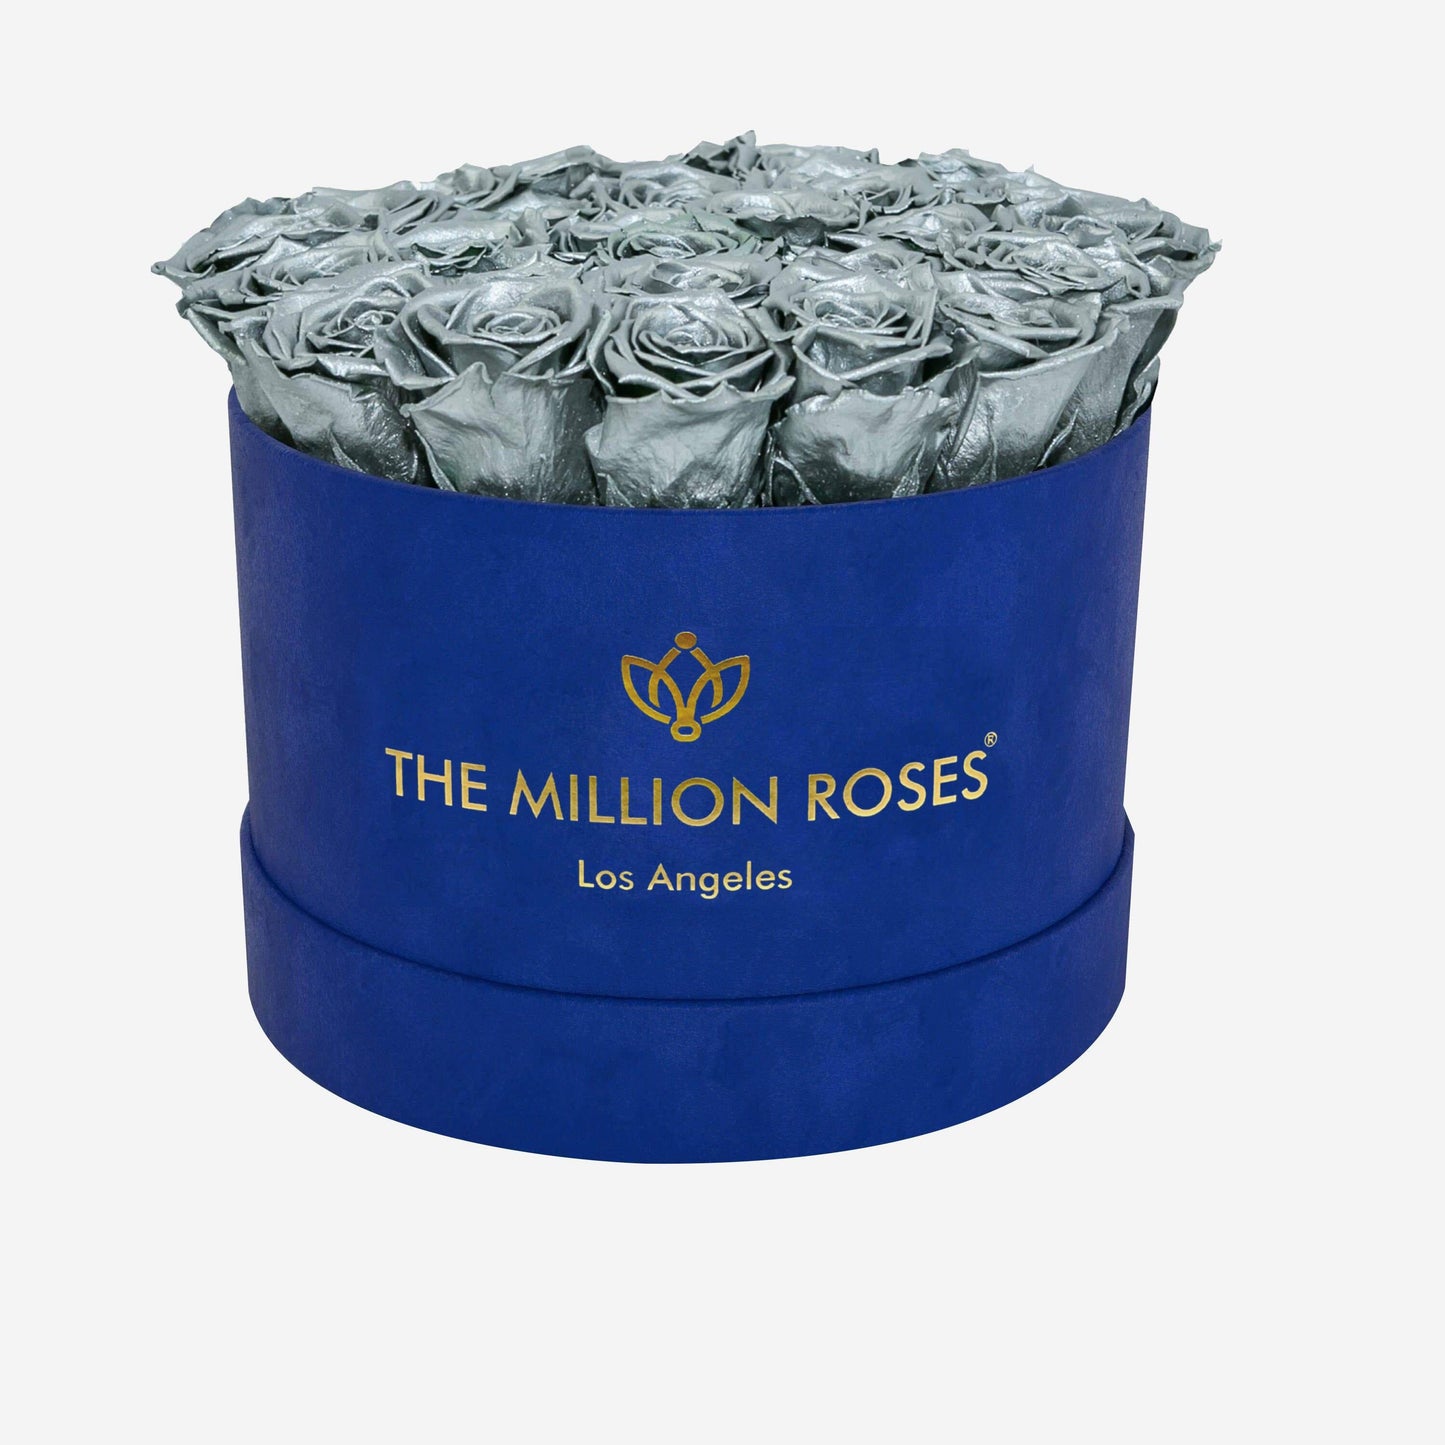 Supreme Royal Blue Suede Box | Silver Roses - The Million Roses